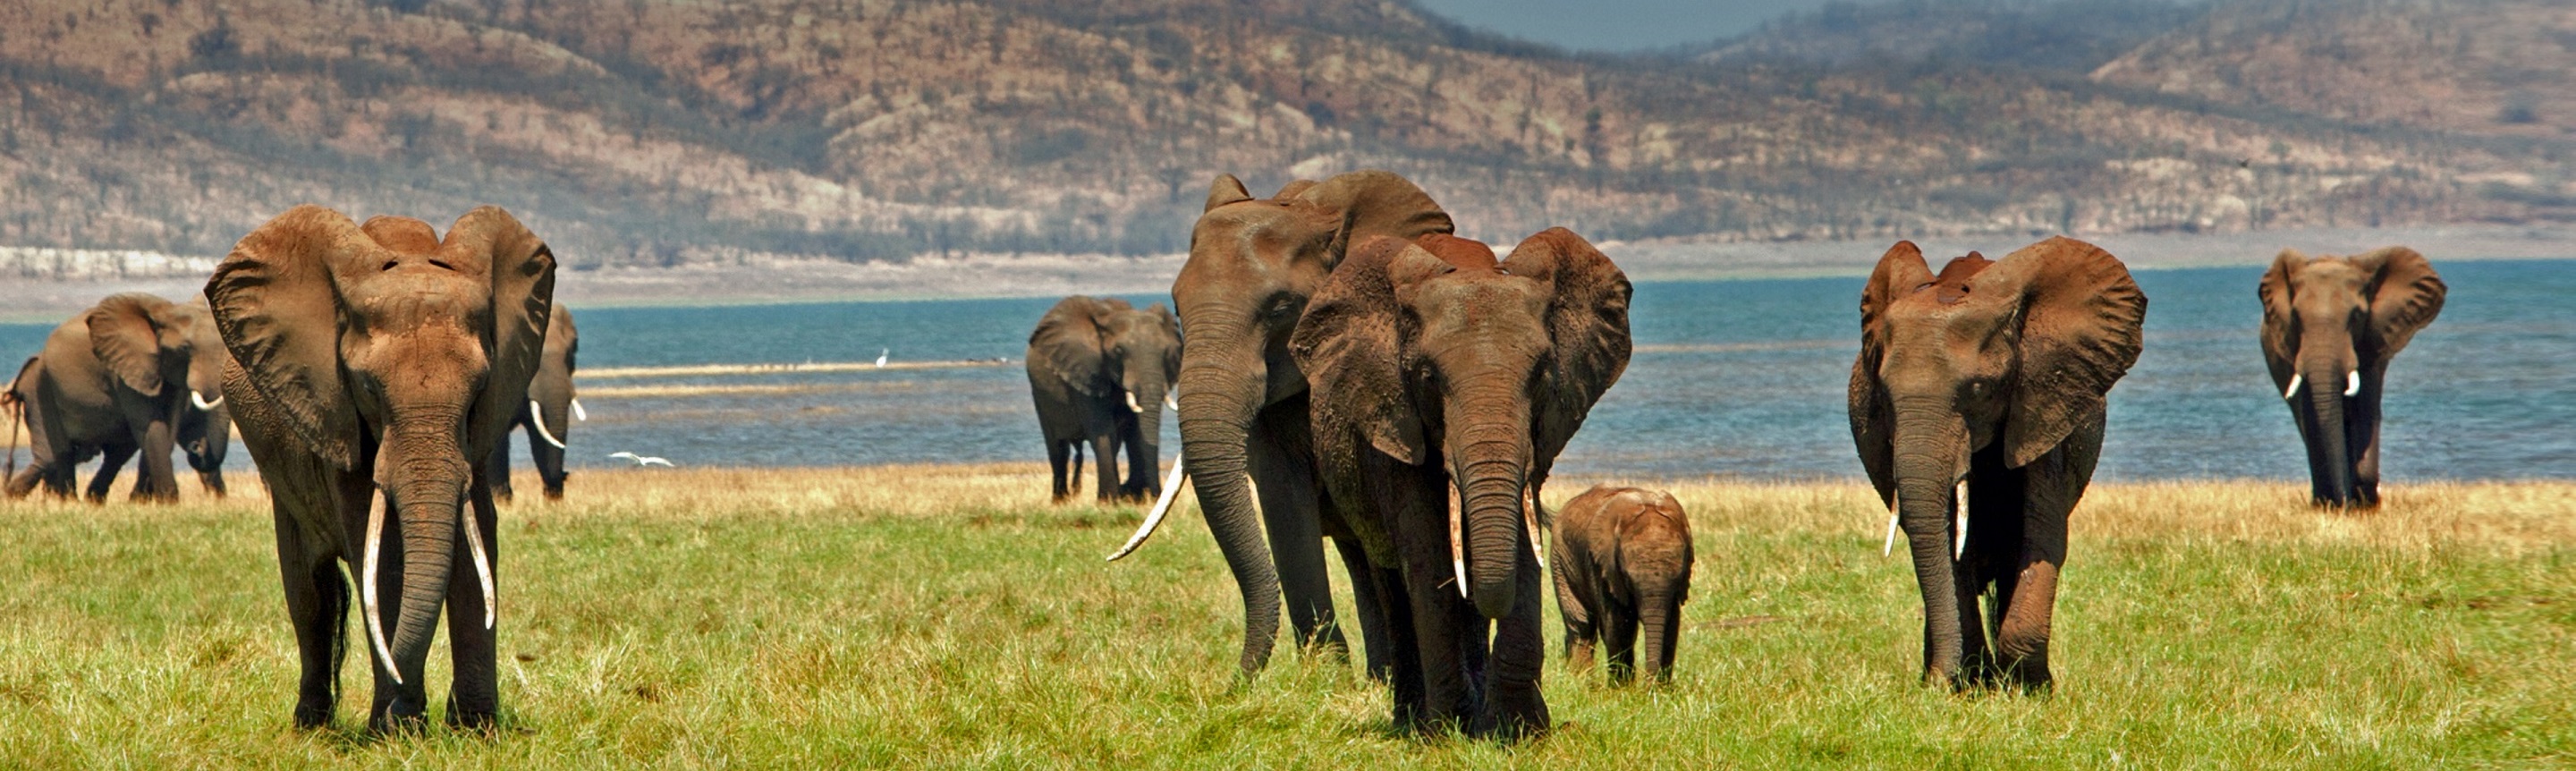 Nieuw African Elephant Facts | Southern Africa Wildlife Guide JD-01